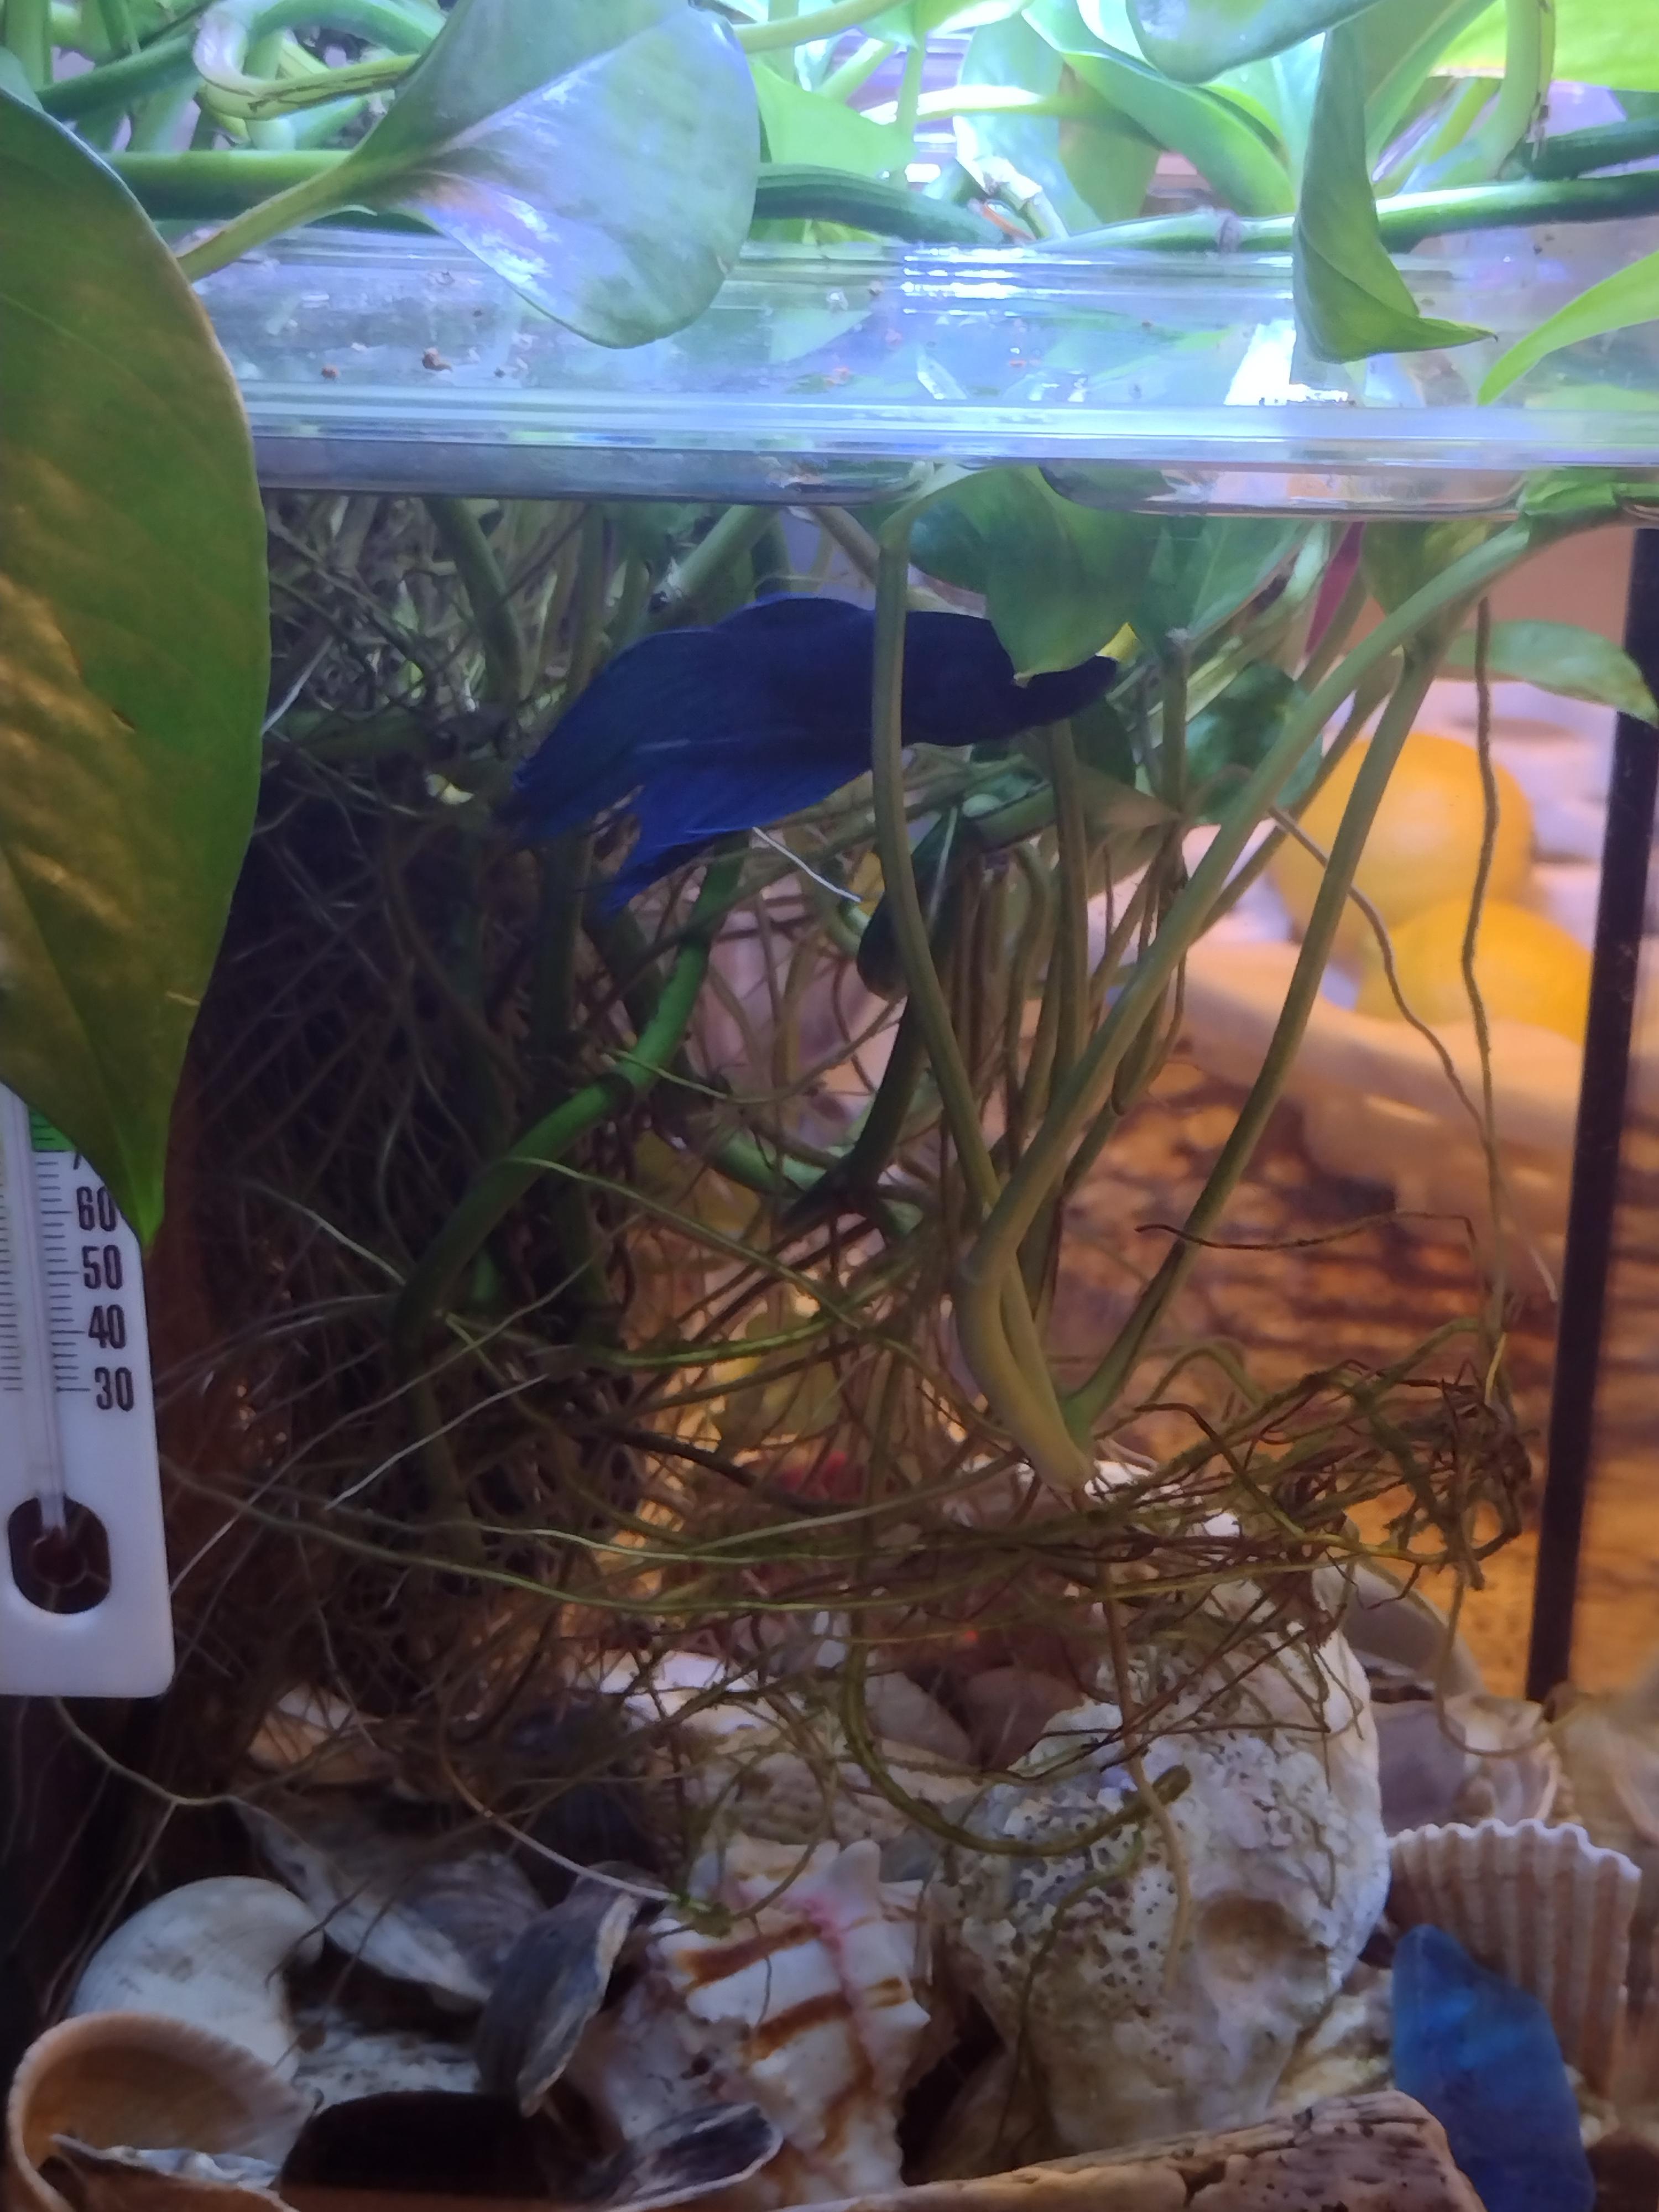 Healthy betta fish swimming in a tank with a thriving pothos plant